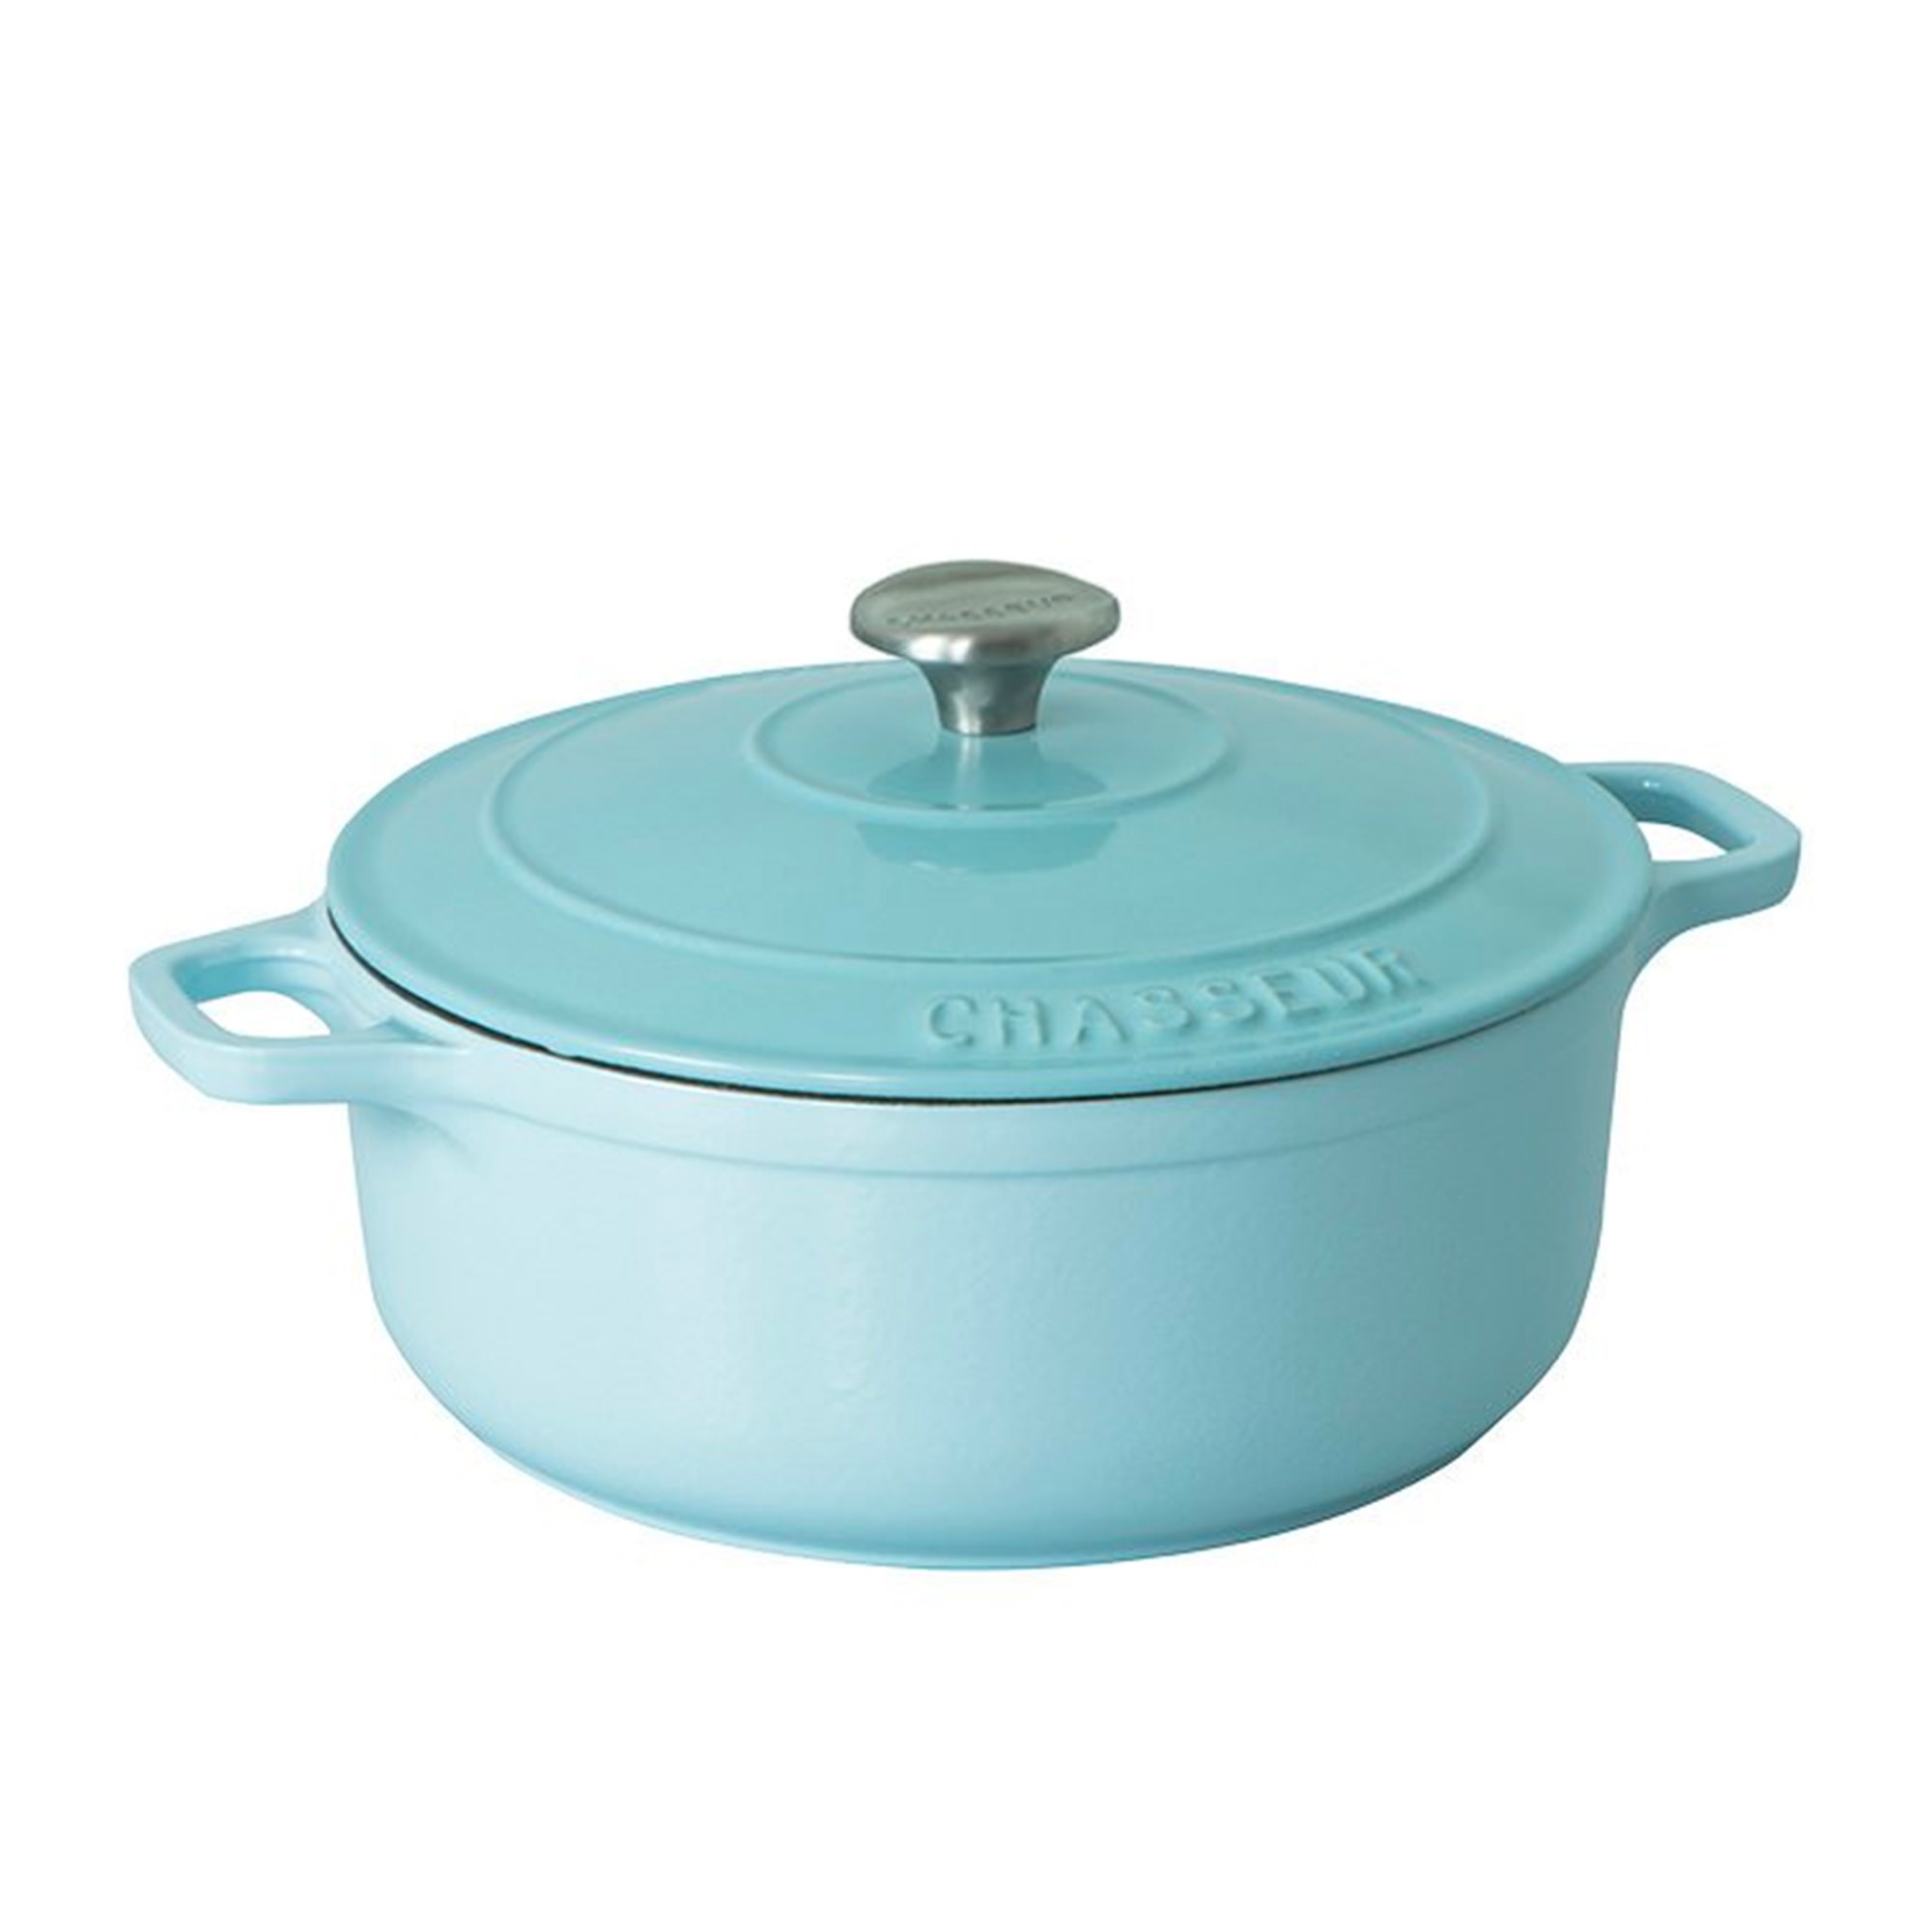 Chasseur Round French Oven 28cm - 6.1L Duck Egg Blue Image 1